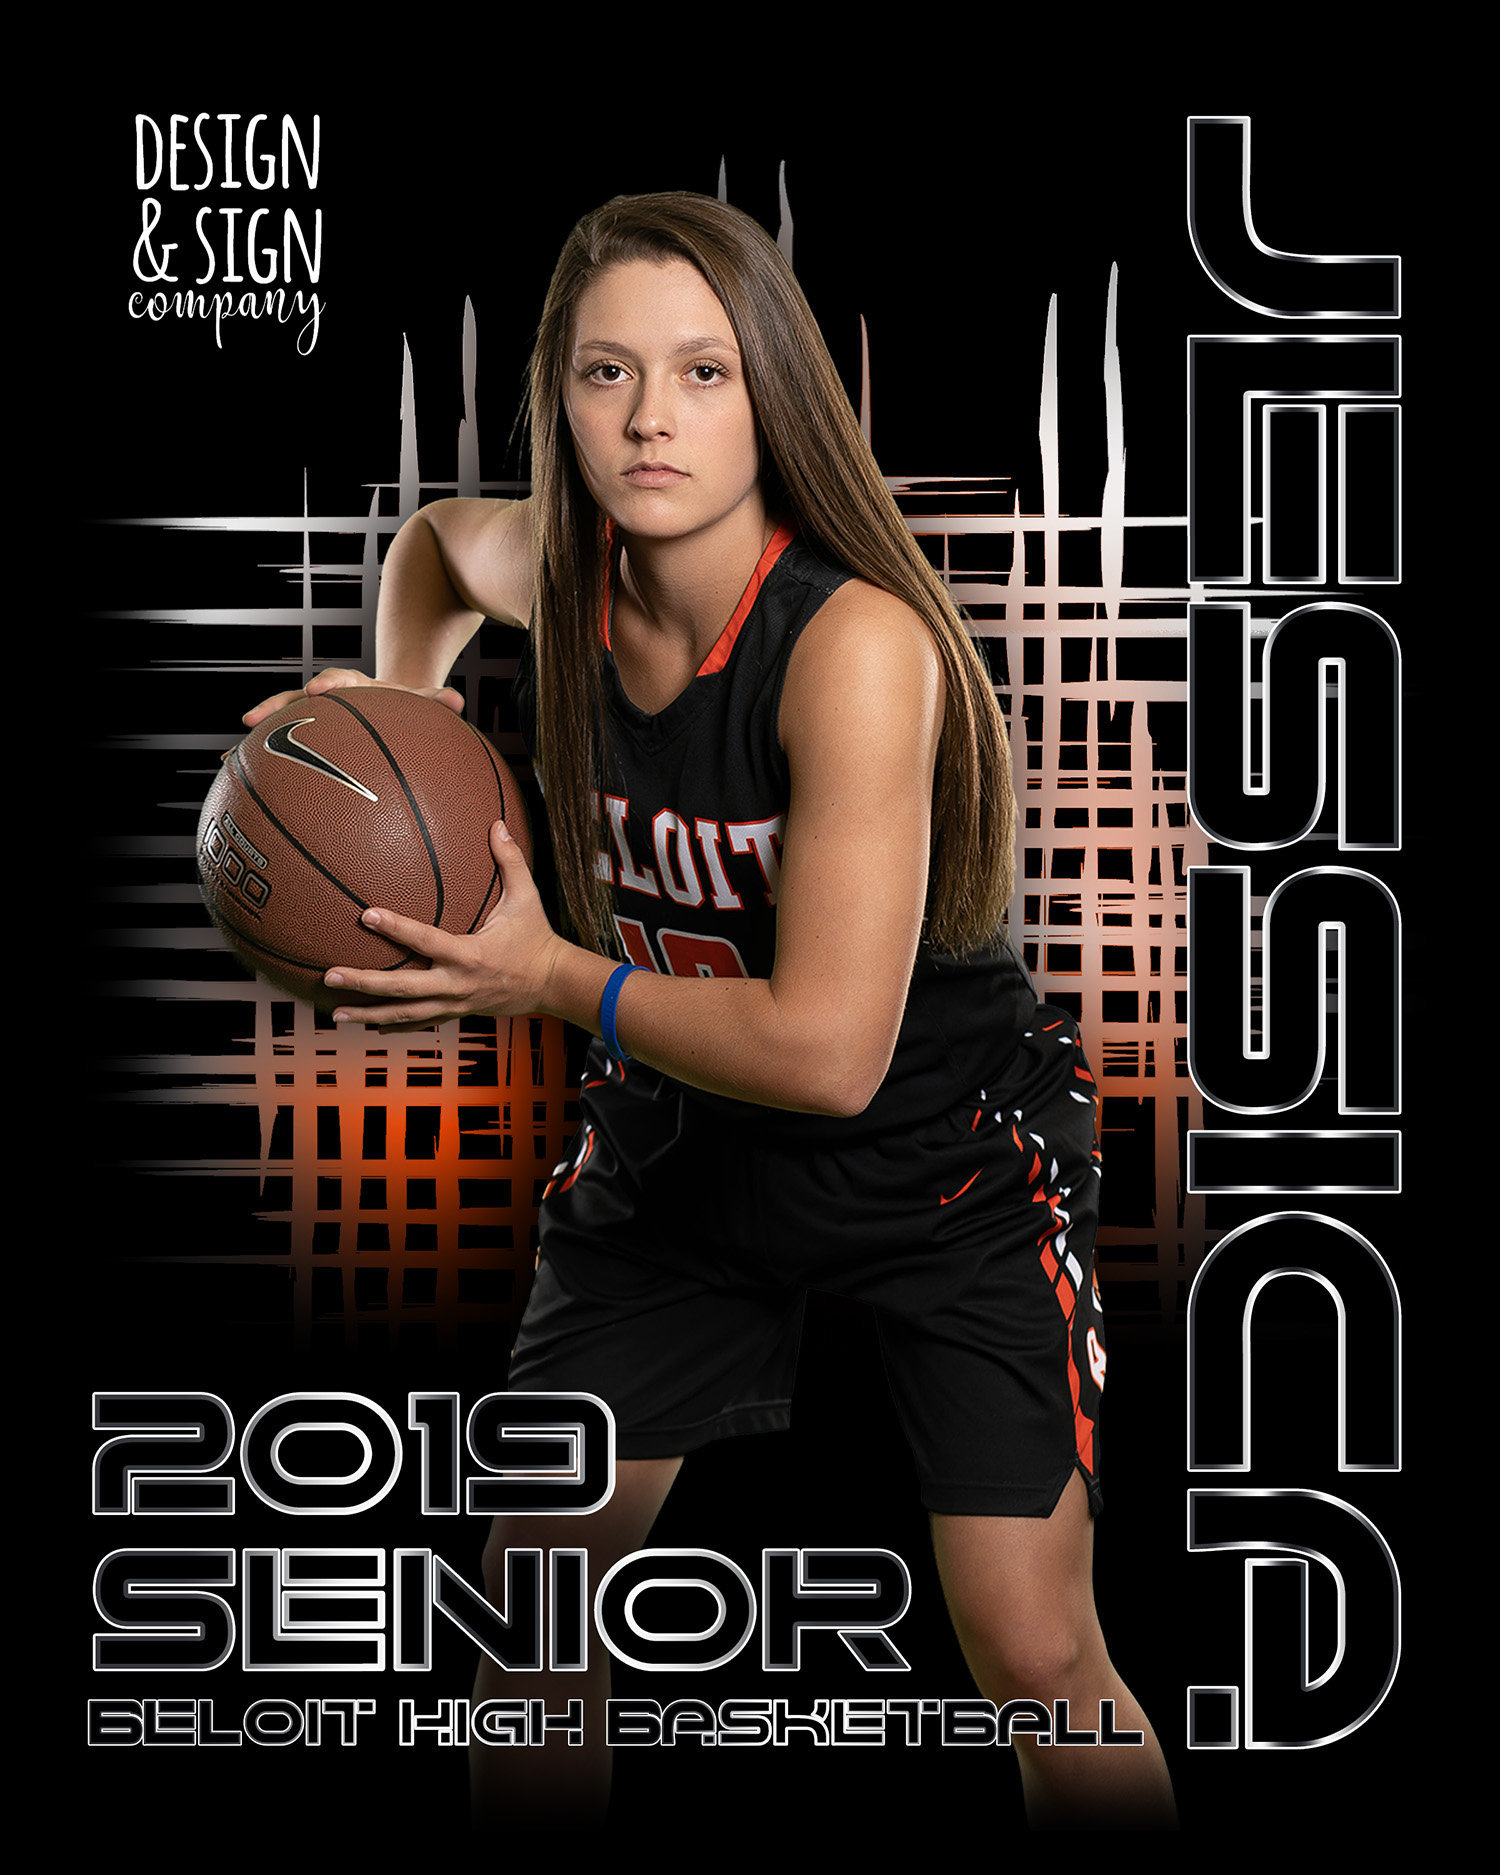 Sports Photography for athletes, teams, banners, posters, portraits